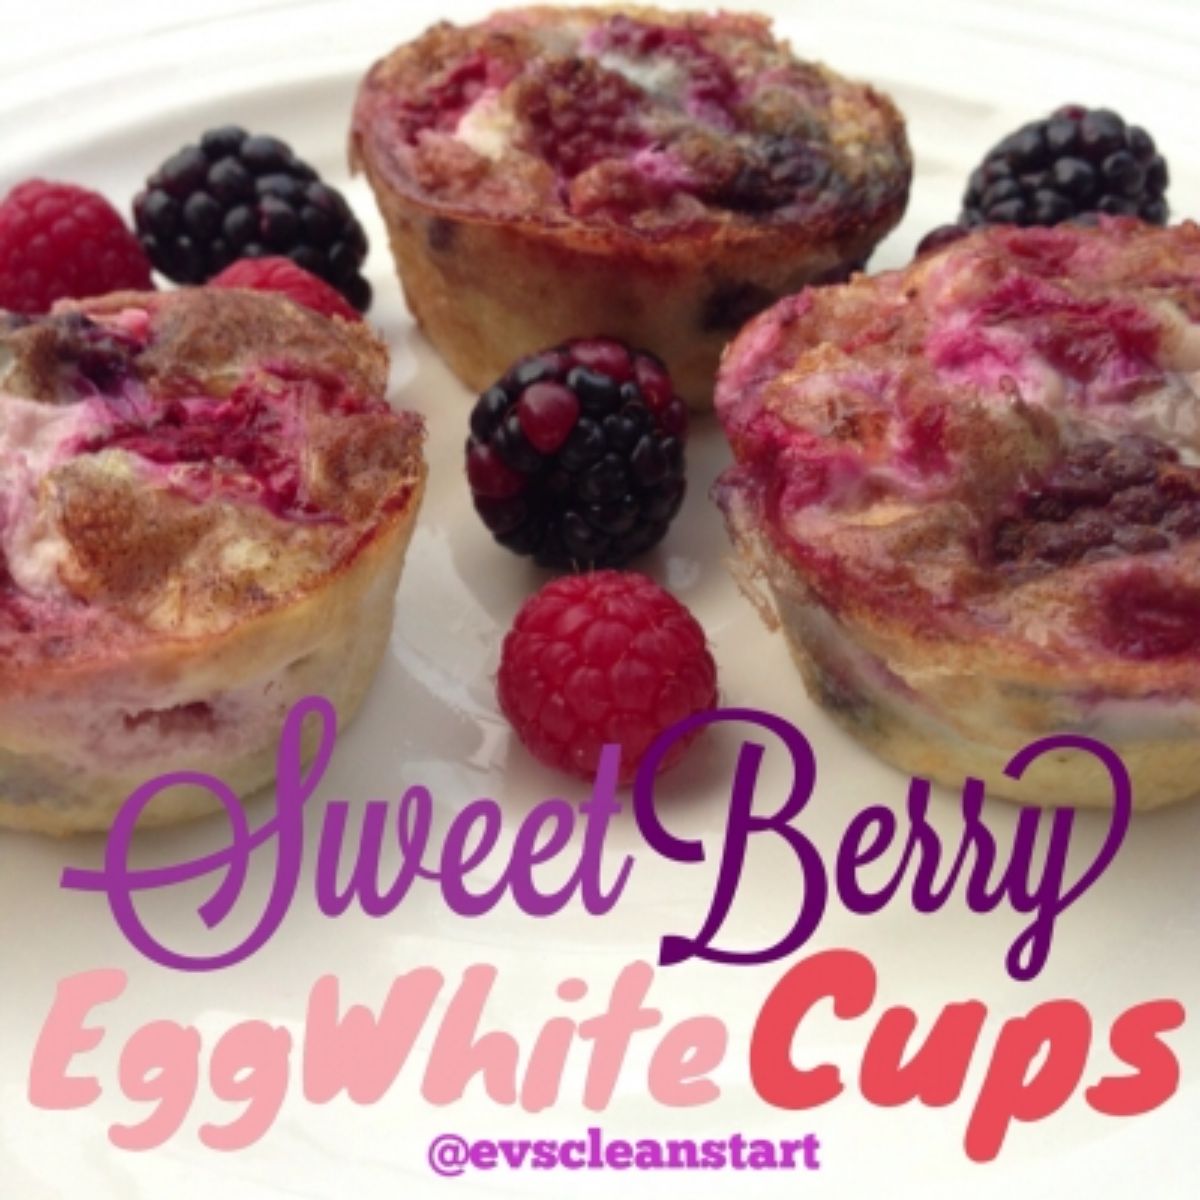 Flavorful sweet berry egg white cups on a white plate.